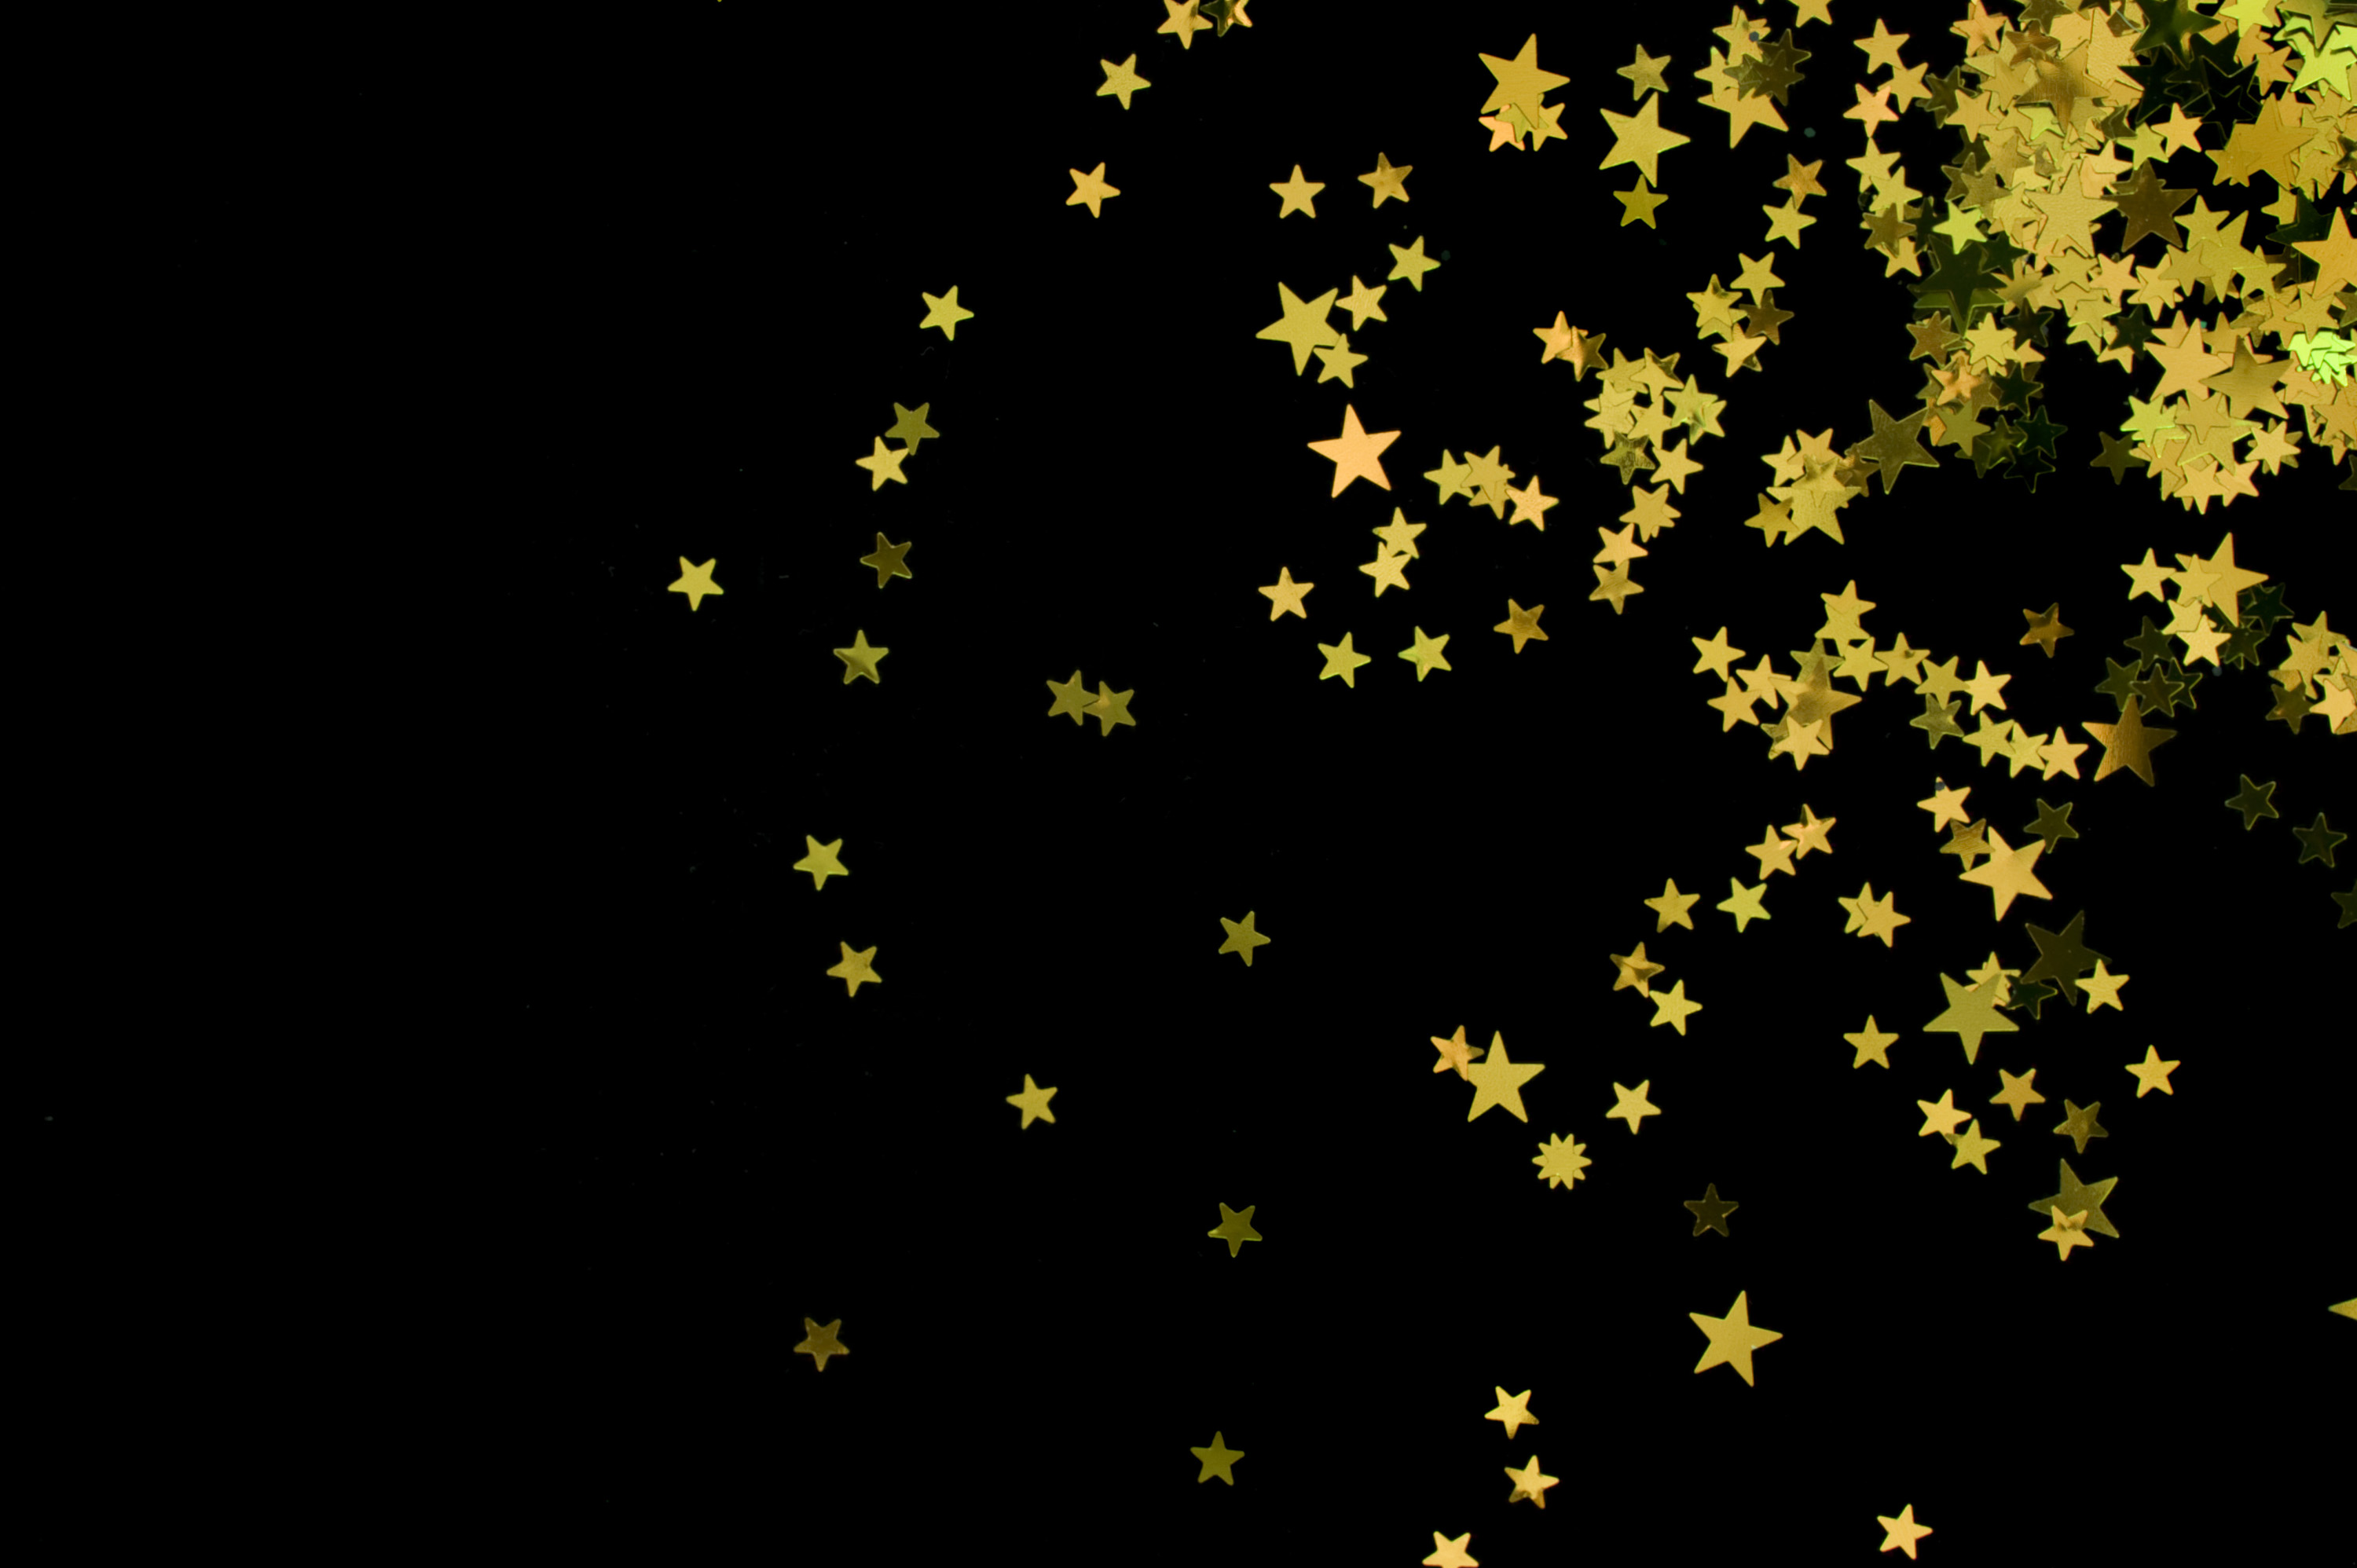  scattering of yellow coloured glitter star shapes on a black backdrop